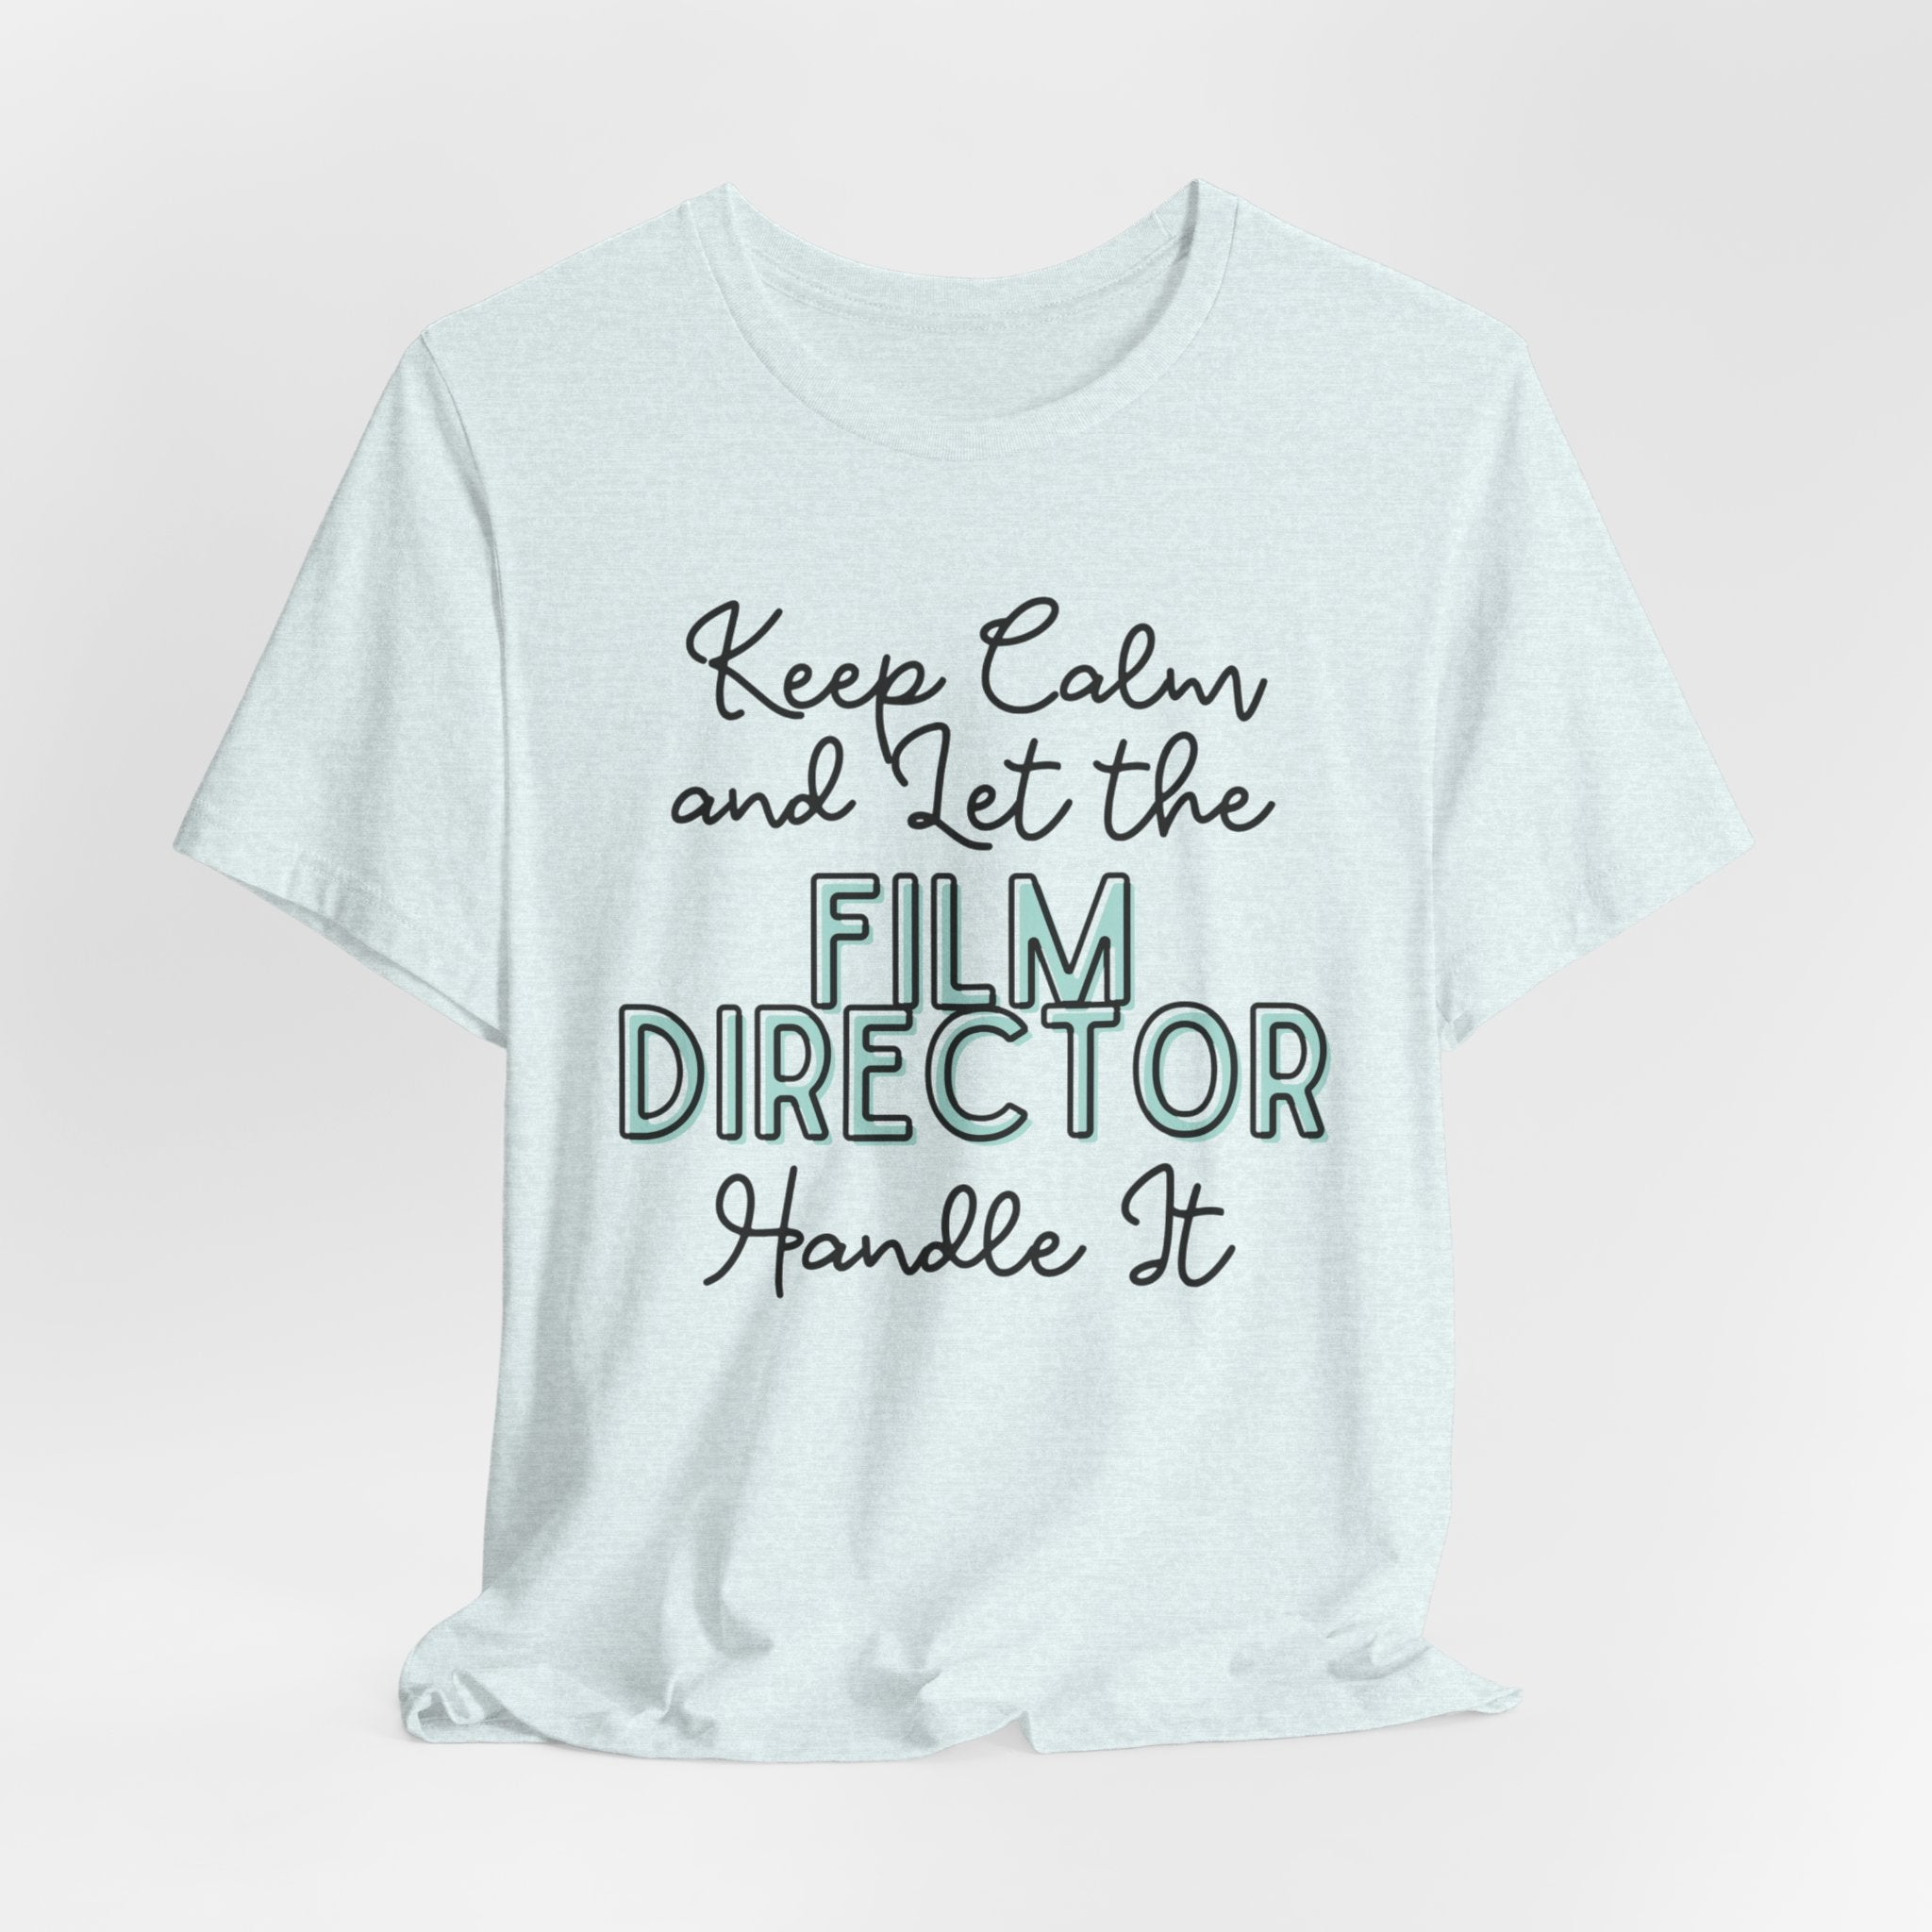 Keep Calm and let the Film Director handle It - Jersey Short Sleeve Tee